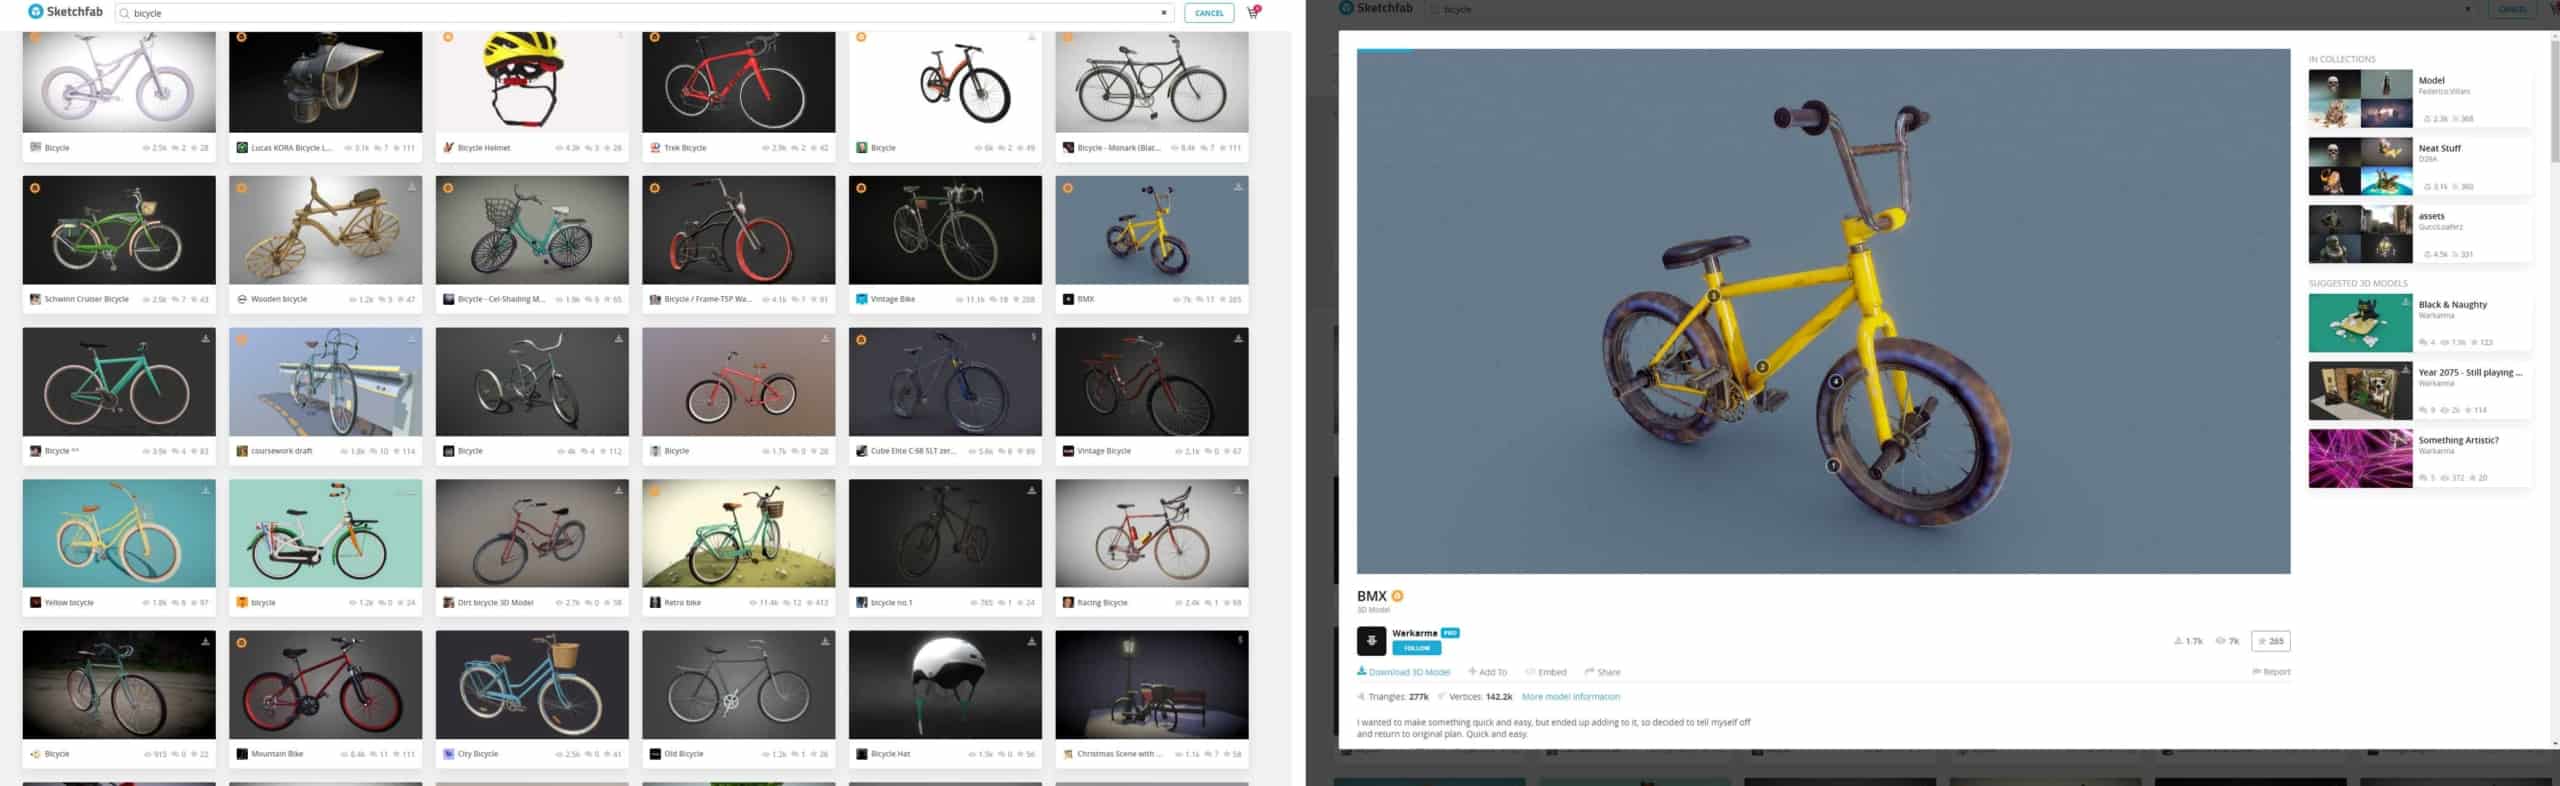 3d model art reference tools: Need bike reference? Search for it on Sketchfab. Click a 3D model you you like and move it in 3D space "in-browser."